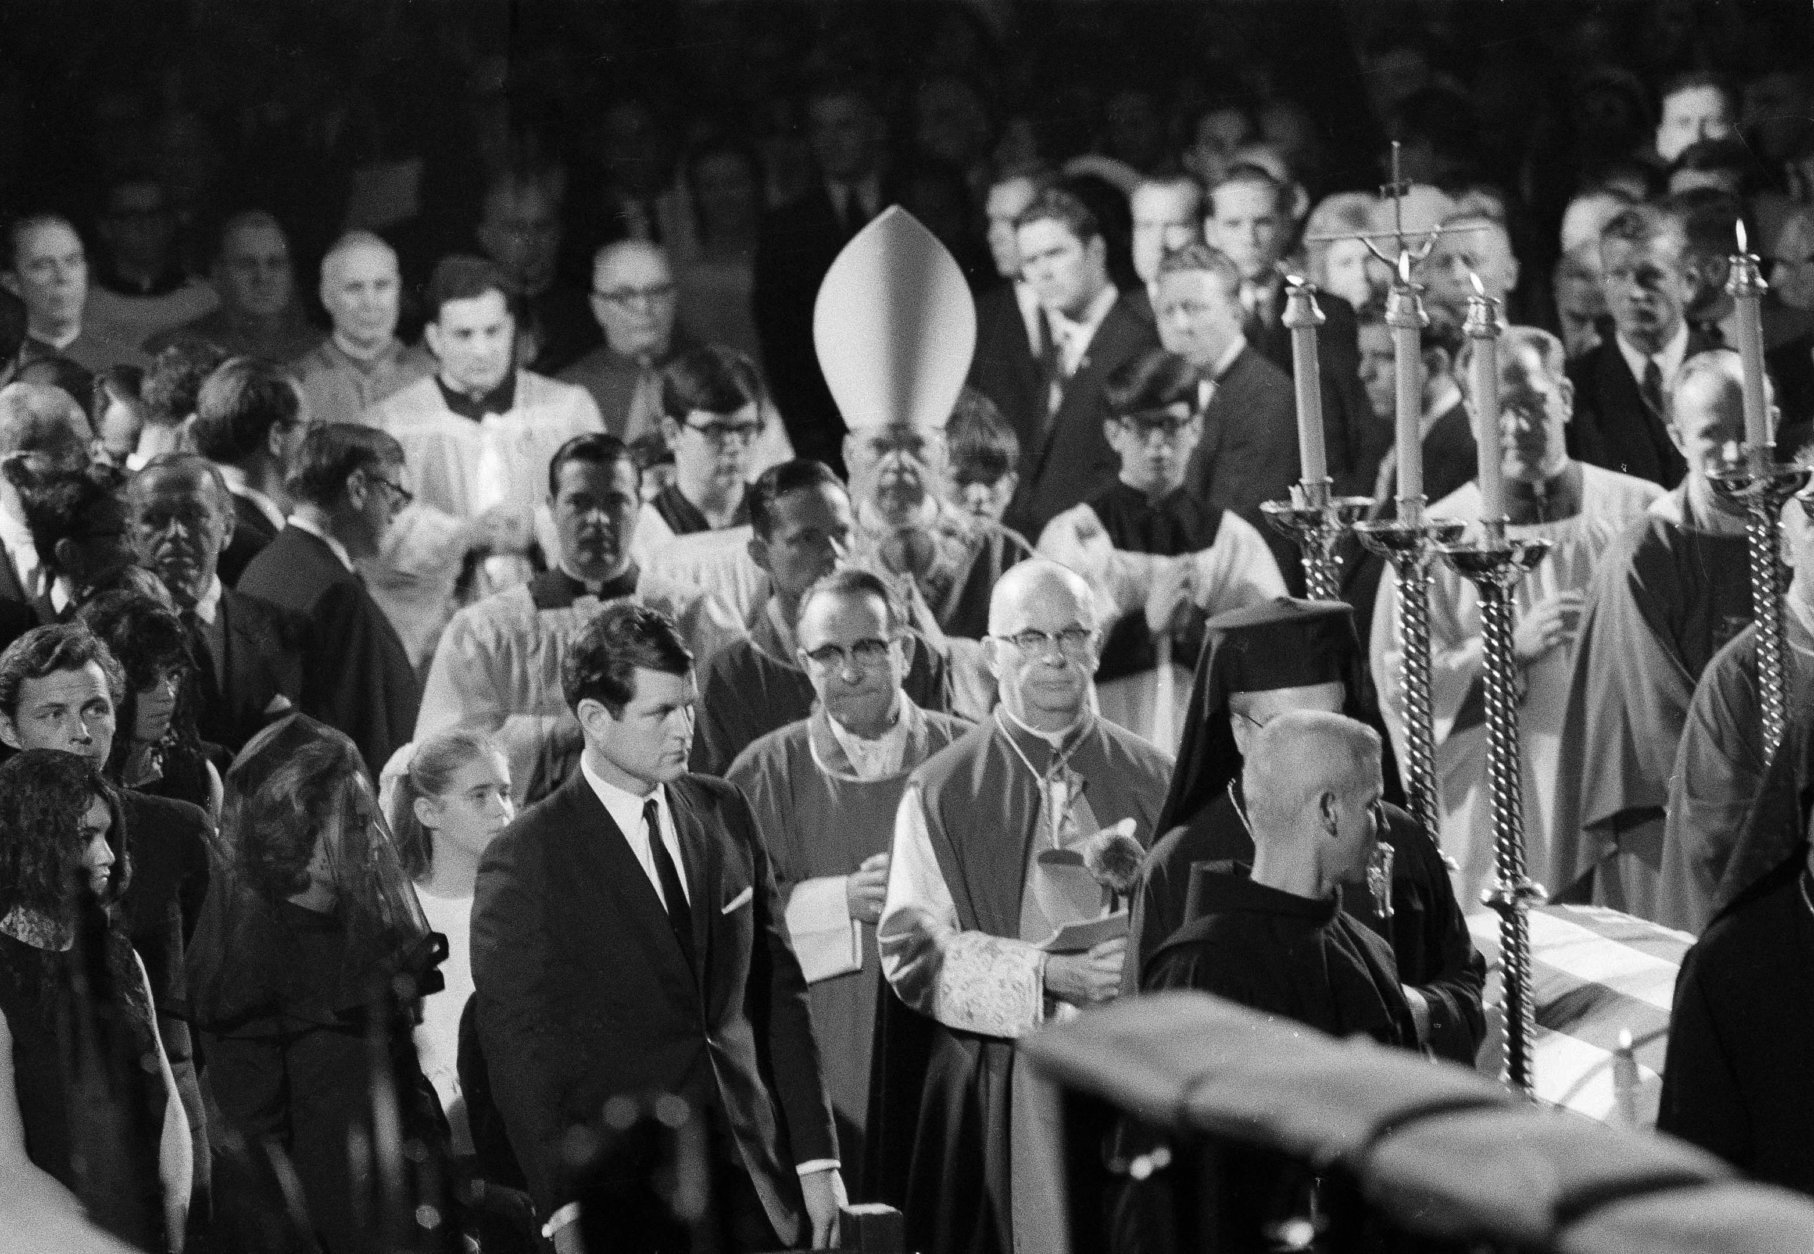 Sen. Edward Kennedy enters St. Patrick's Cathedral for the funeral for his brother Robert F. Kennedy, June 8, 1968.  Behind him is Robert Kennedy's widow, Ethel Skakel Kennedy. New York Roman Catholic Archbishop Terence Cooke is seen at center. New York City Mayor John V. Lindsay is seen at far right  (AP Photo)